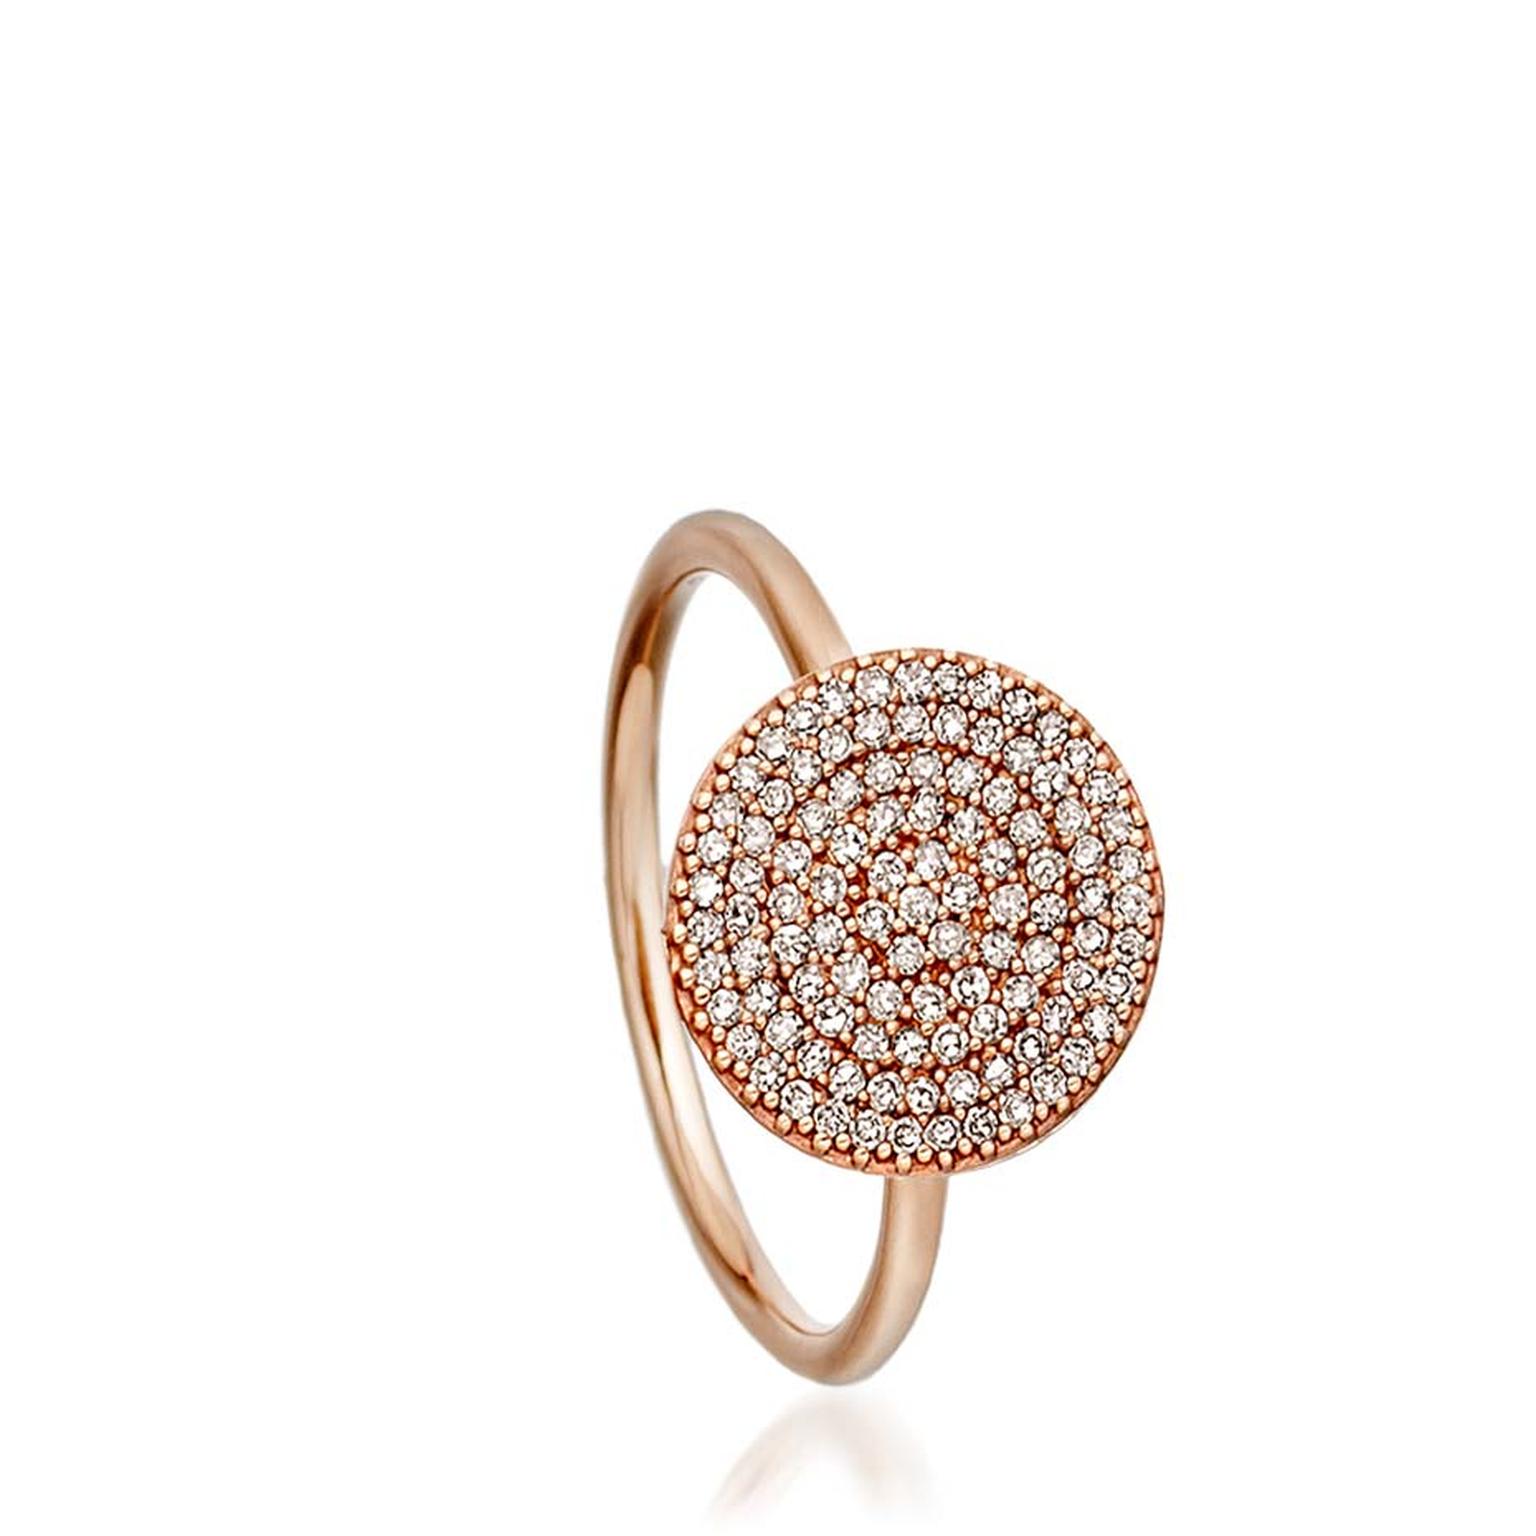 Astley Clarke Muse collection Icon ring in rose gold with silver grey diamonds.